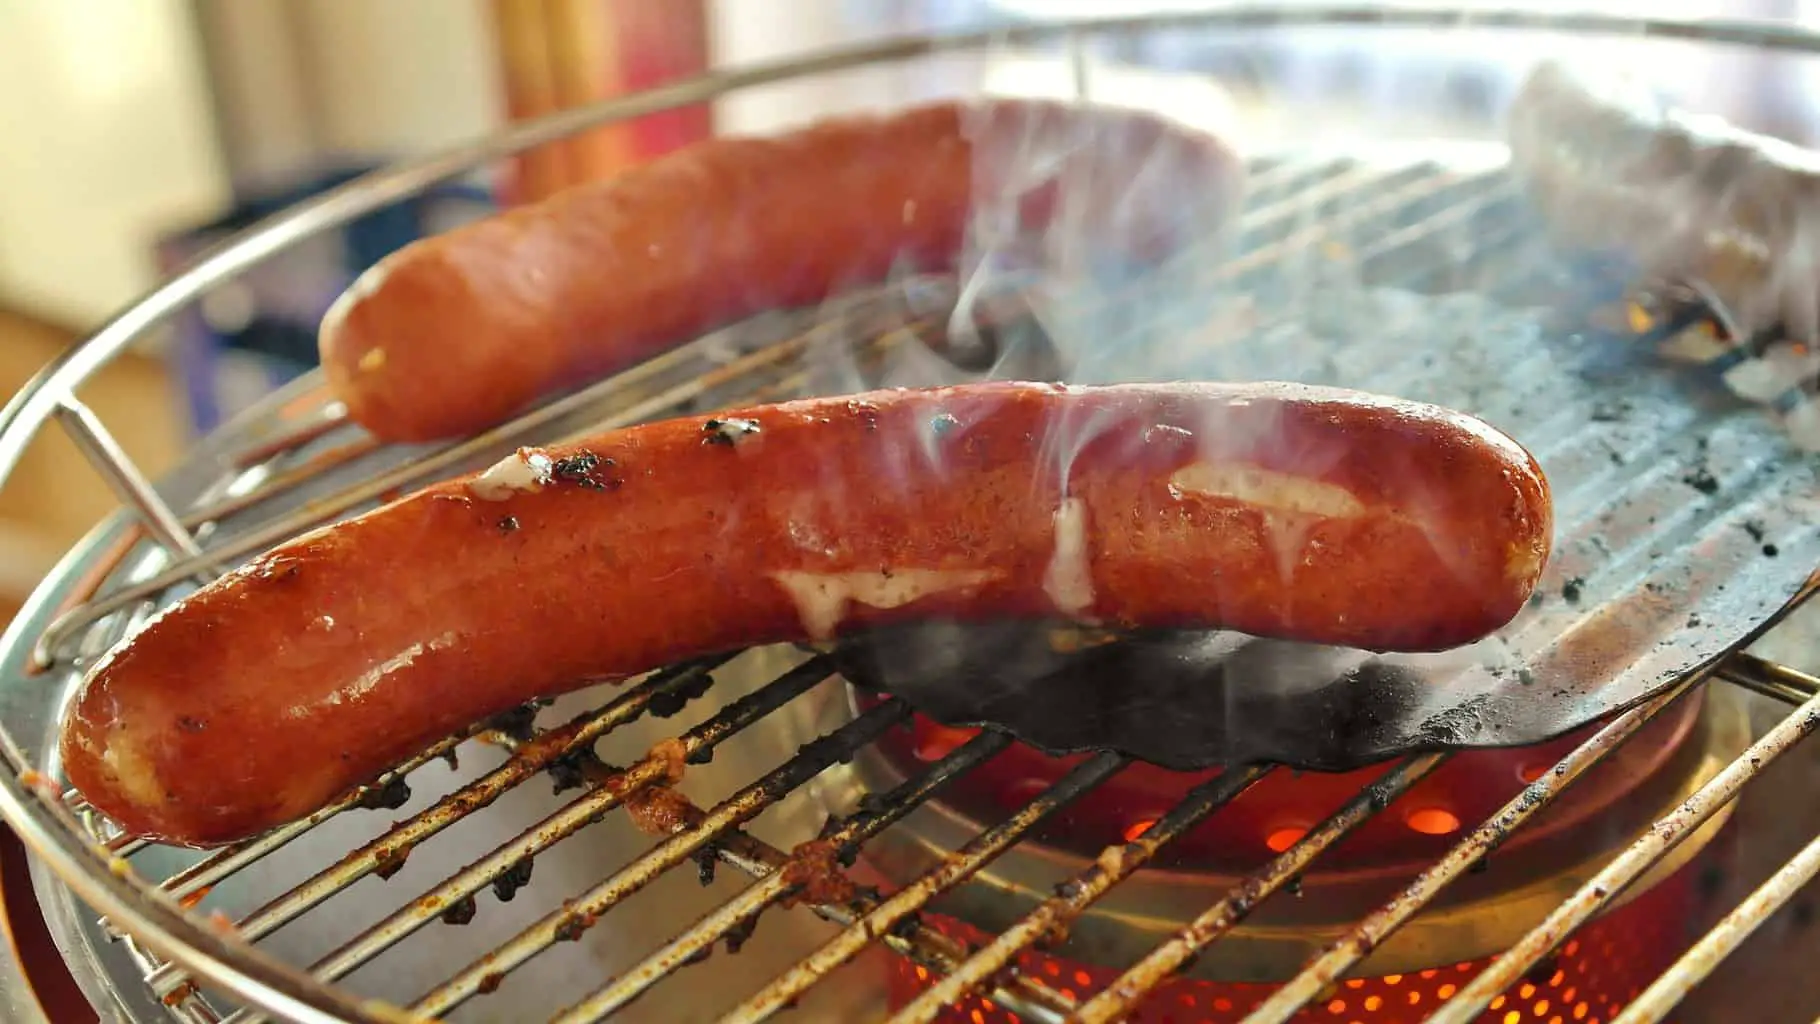 Bratwurst sausages on a grill